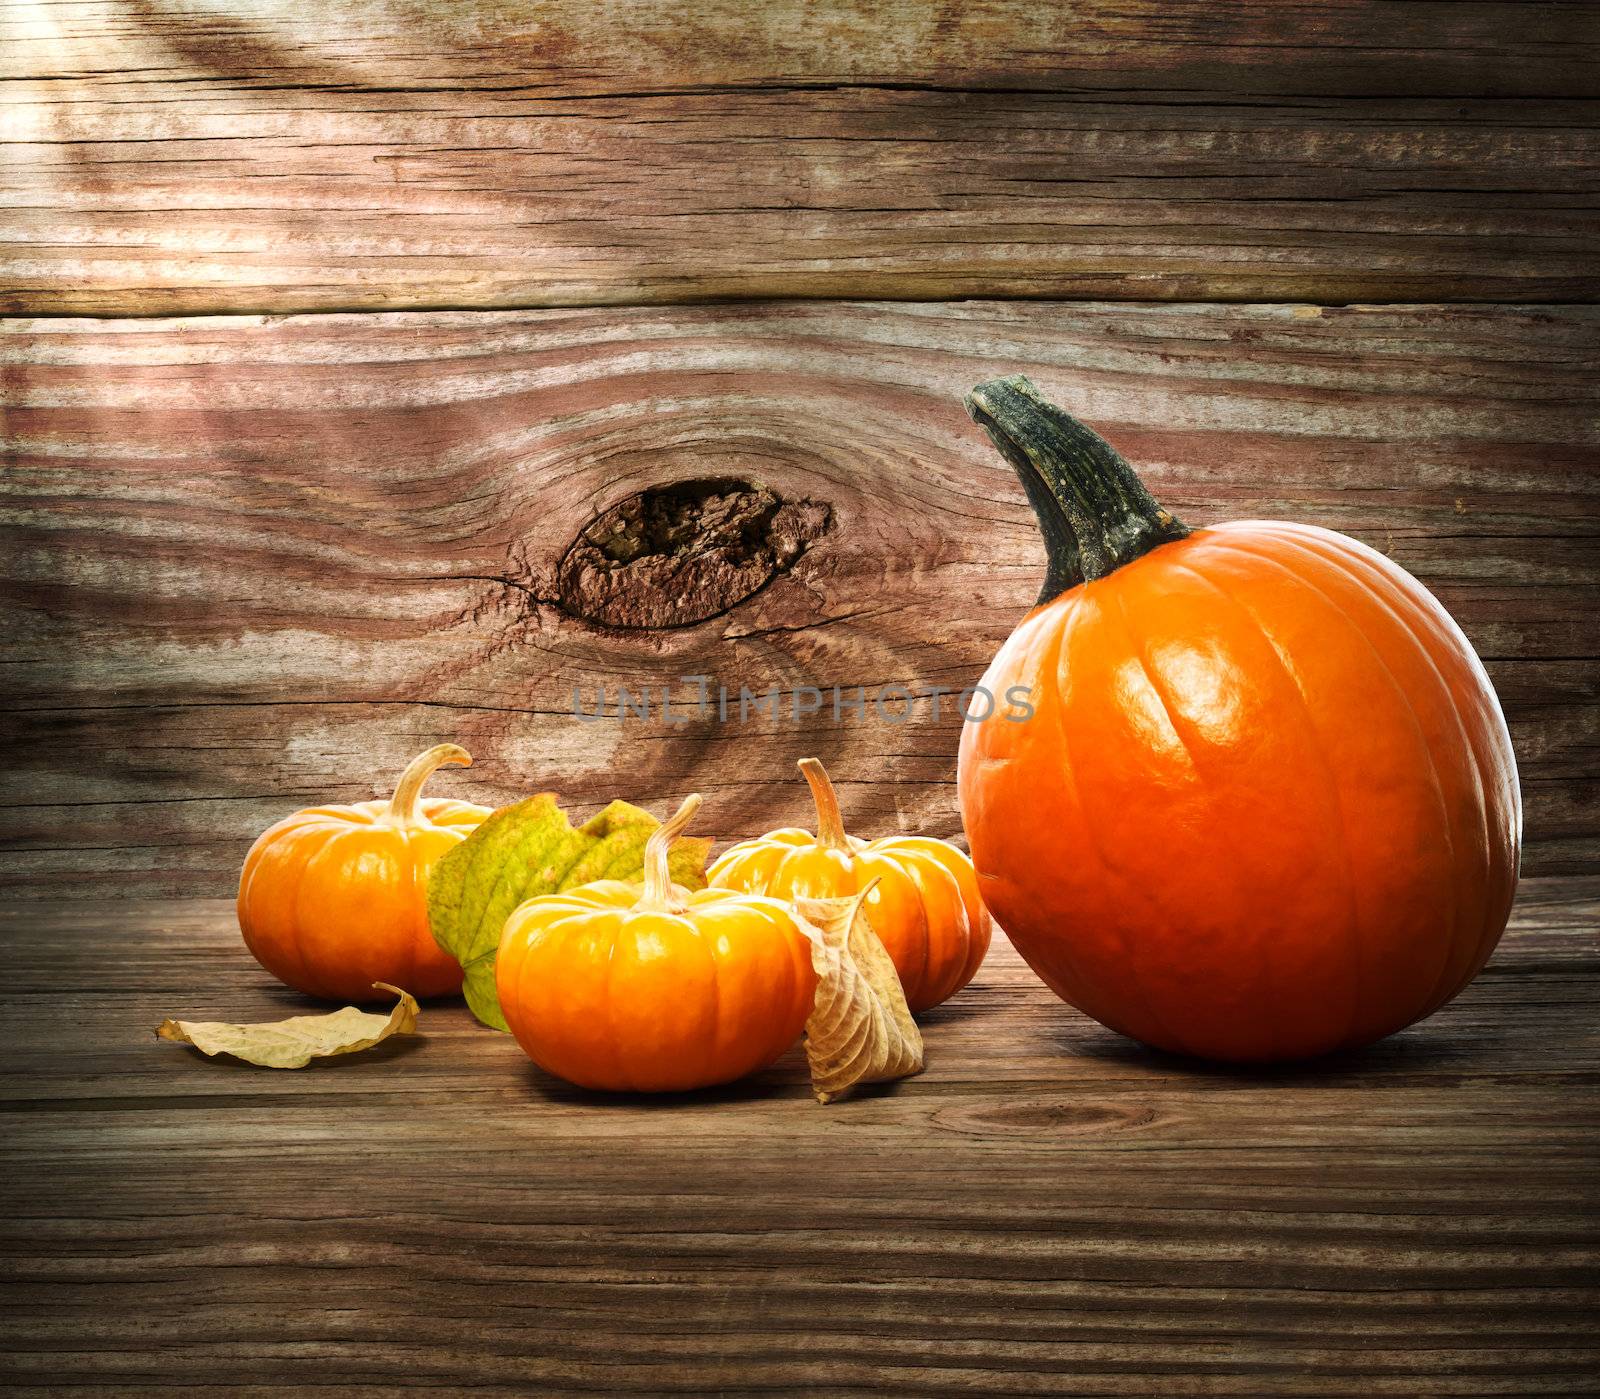 Squashes and pumpkins on wooden table background by melpomene